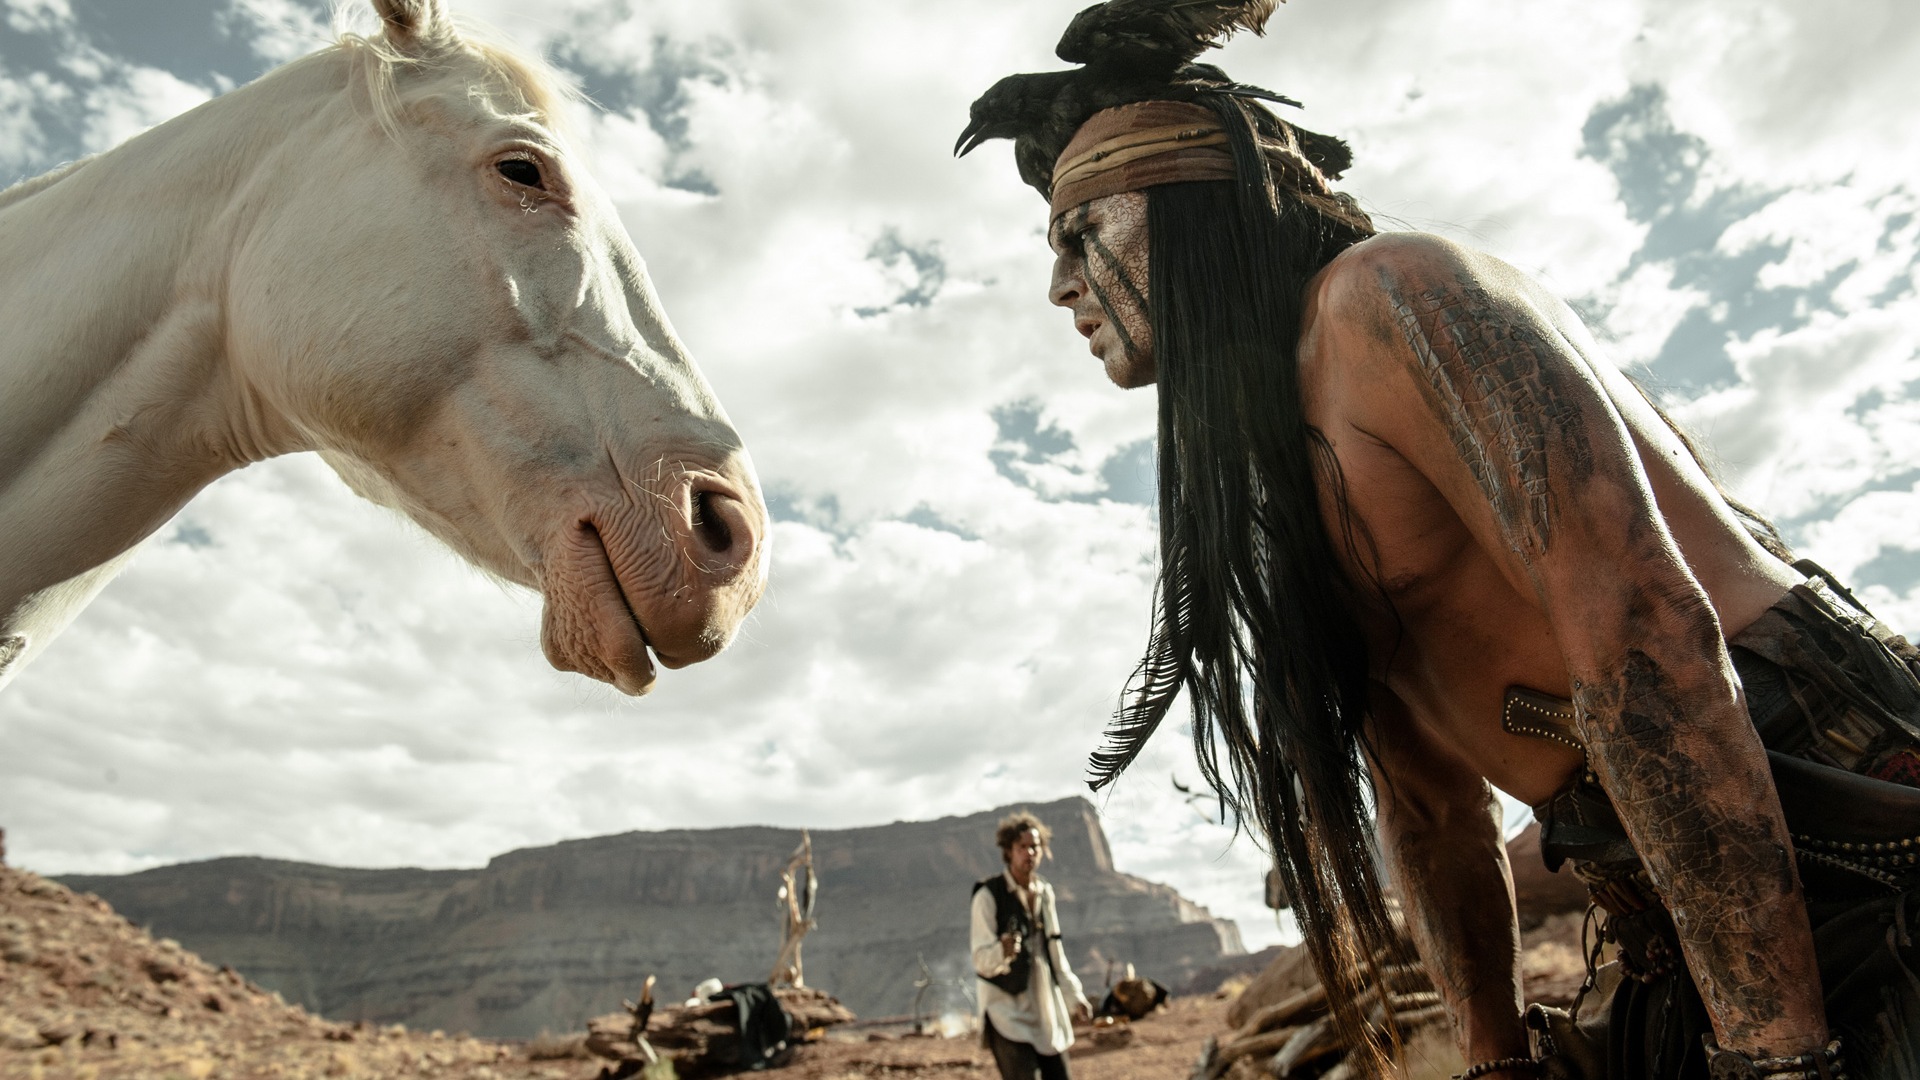 The Lone Ranger HD movie wallpapers #19 - 1920x1080